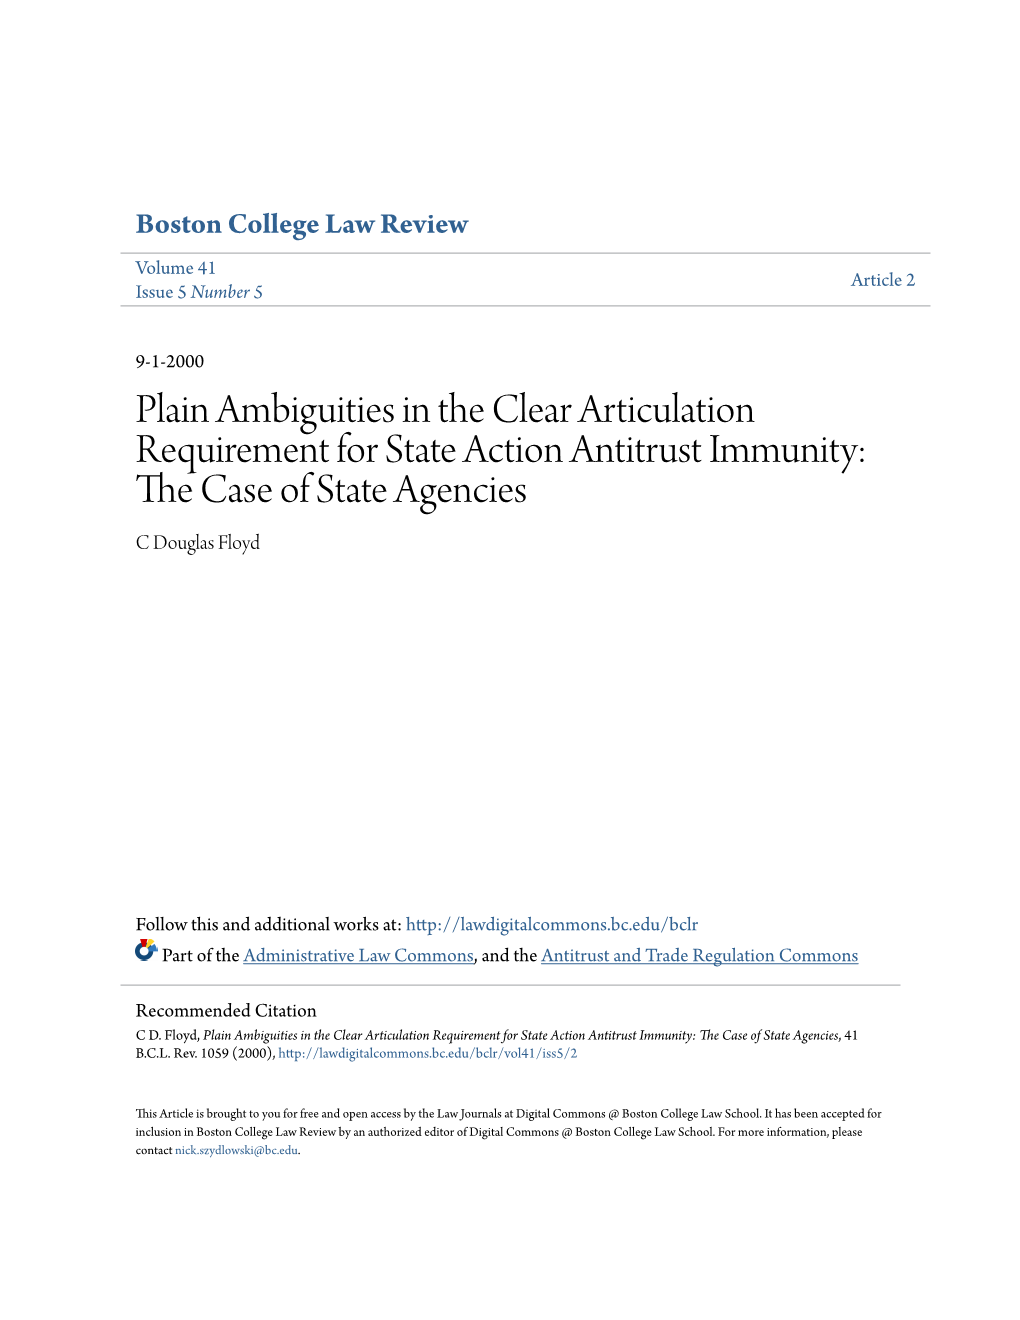 Plain Ambiguities in the Clear Articulation Requirement for State Action Antitrust Immunity: the Ac Se of State Agencies C Douglas Floyd